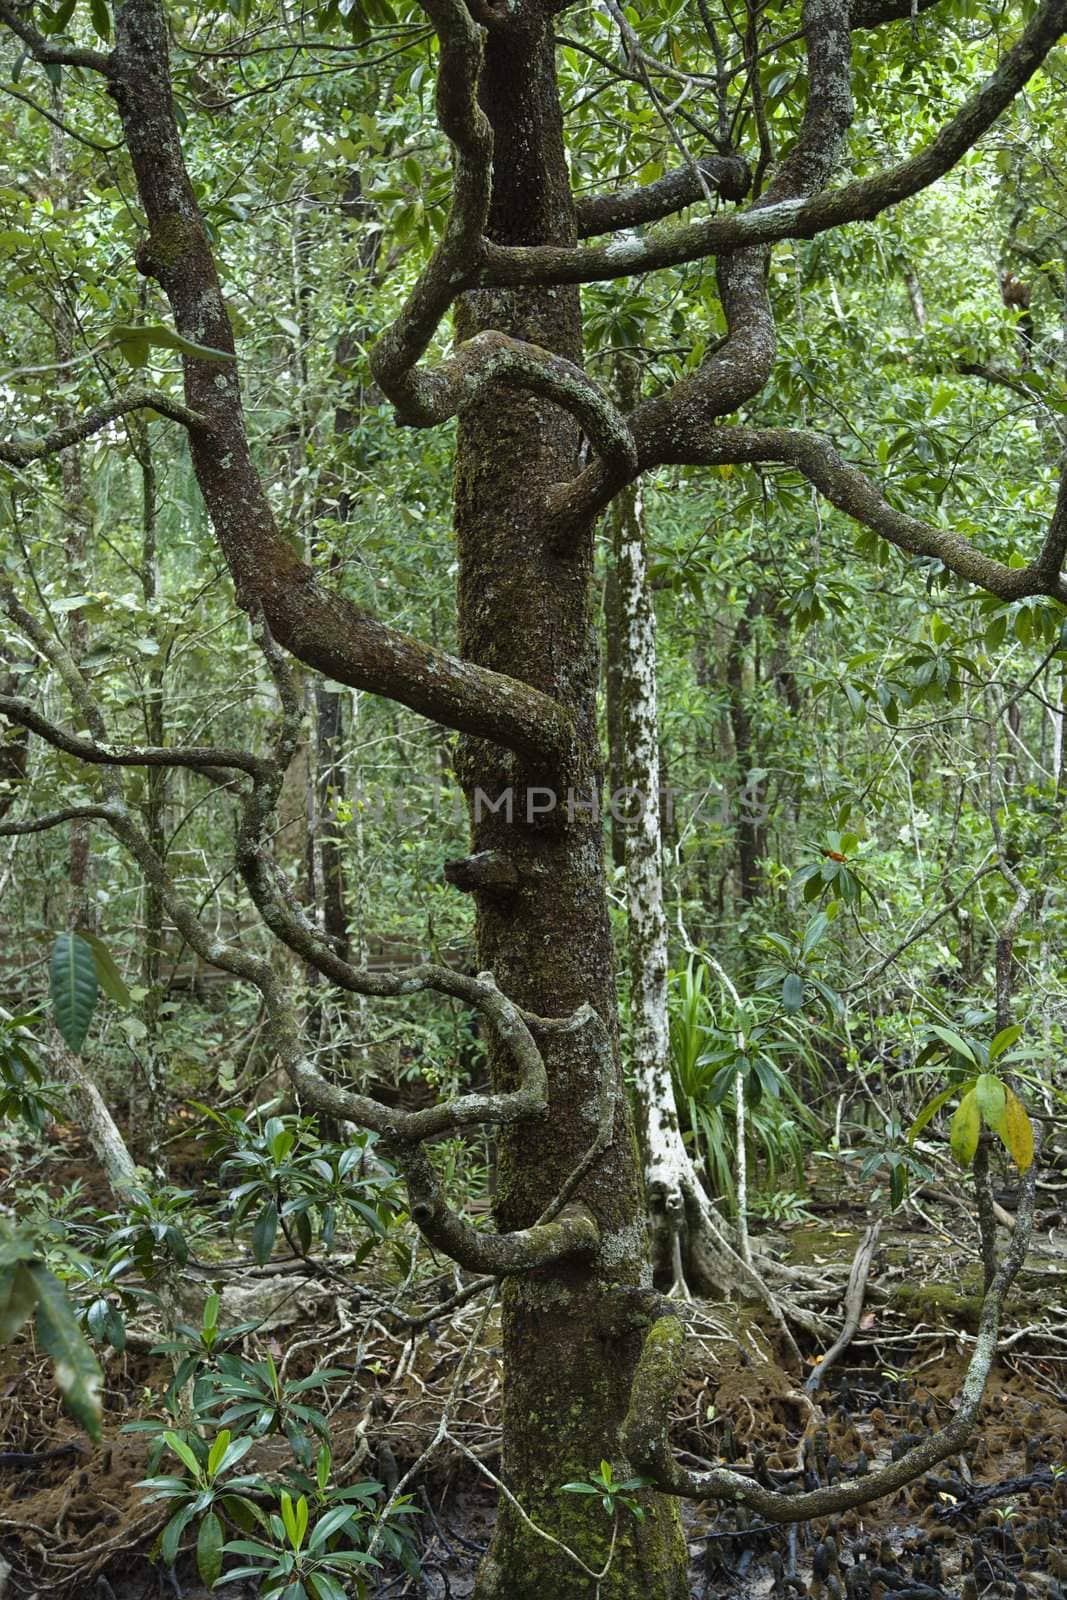 Tree with many low branches in Daintree Rainforest, Australia.